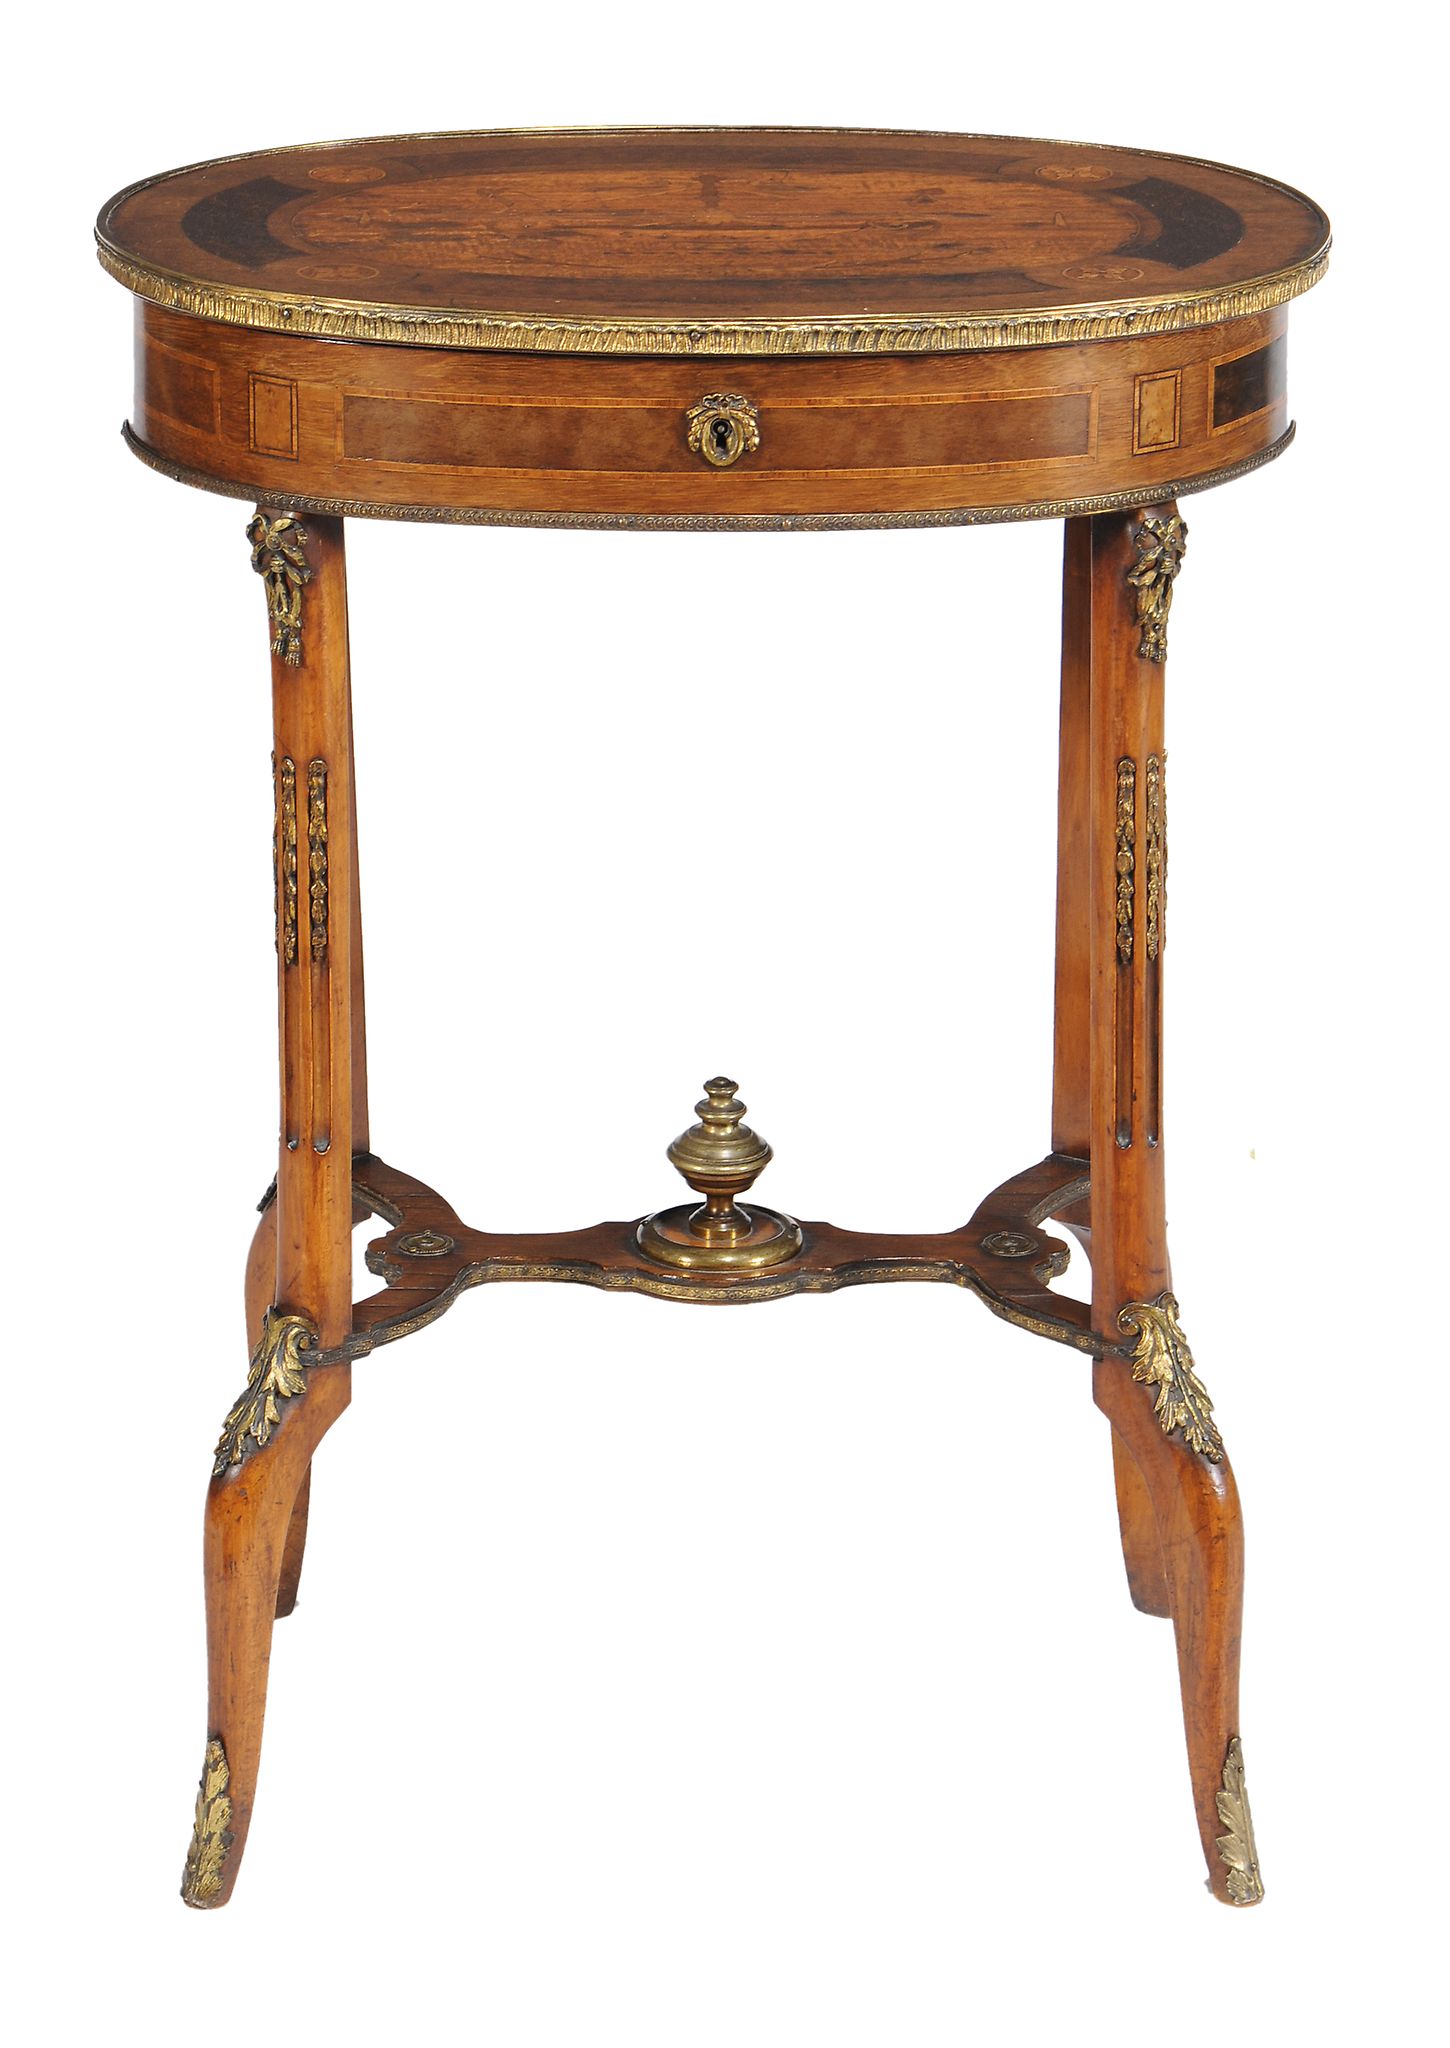 A mahogany and marquetry gilt metal mounted gueridon in Louis XVI style  A mahogany and marquetry